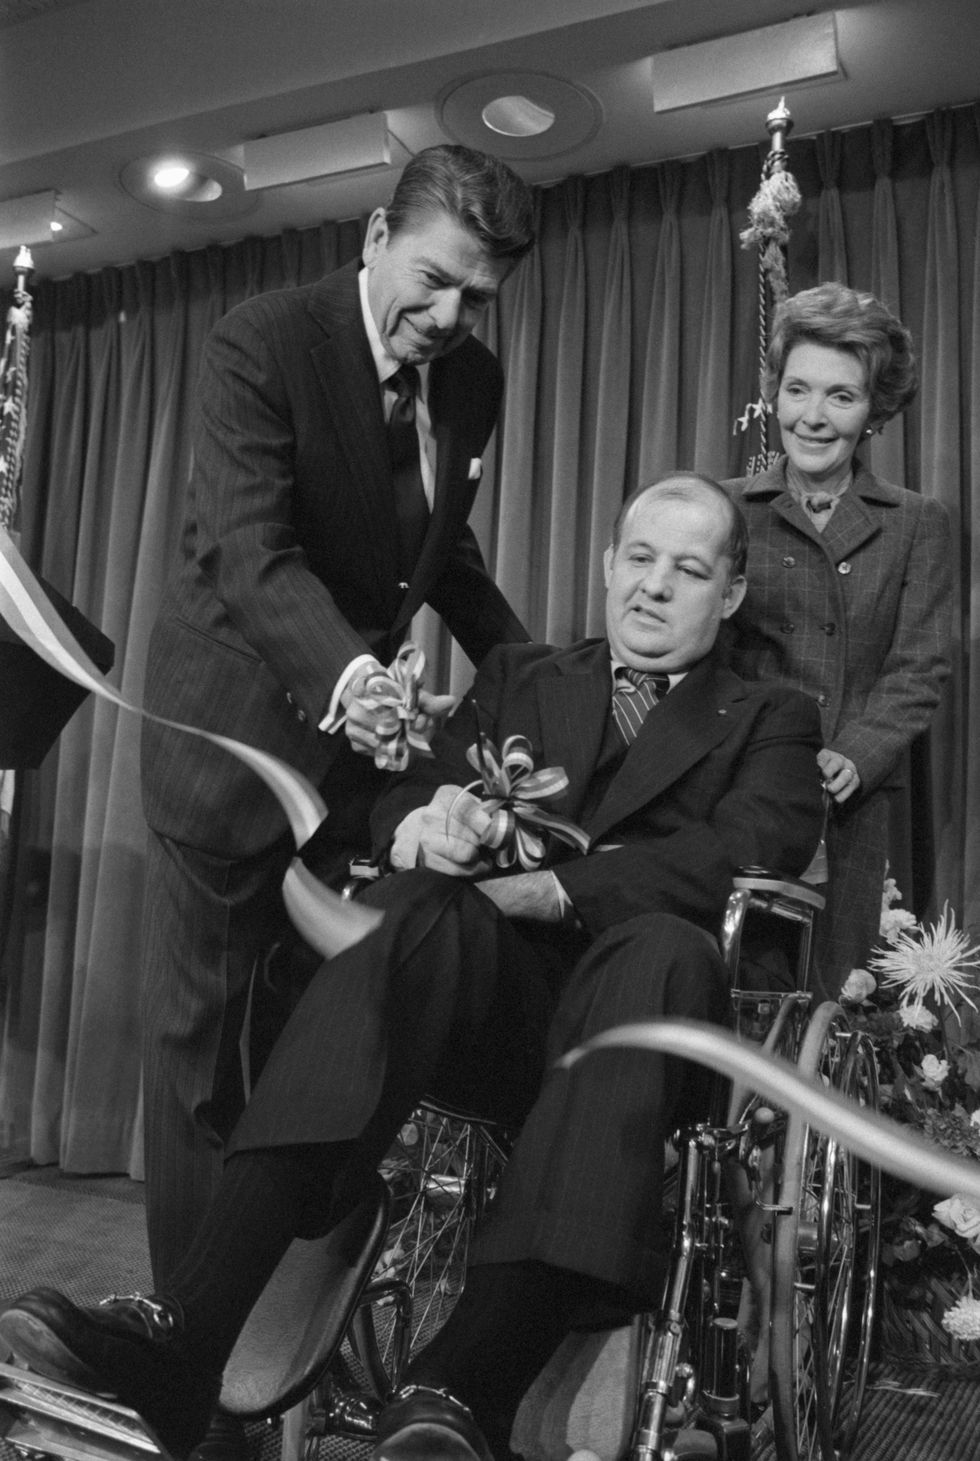 Press Secretary Jim Brady, with Ronald and Nancy Reagan, cuts the ribbon opening the renovated press center at the White House in November 1981